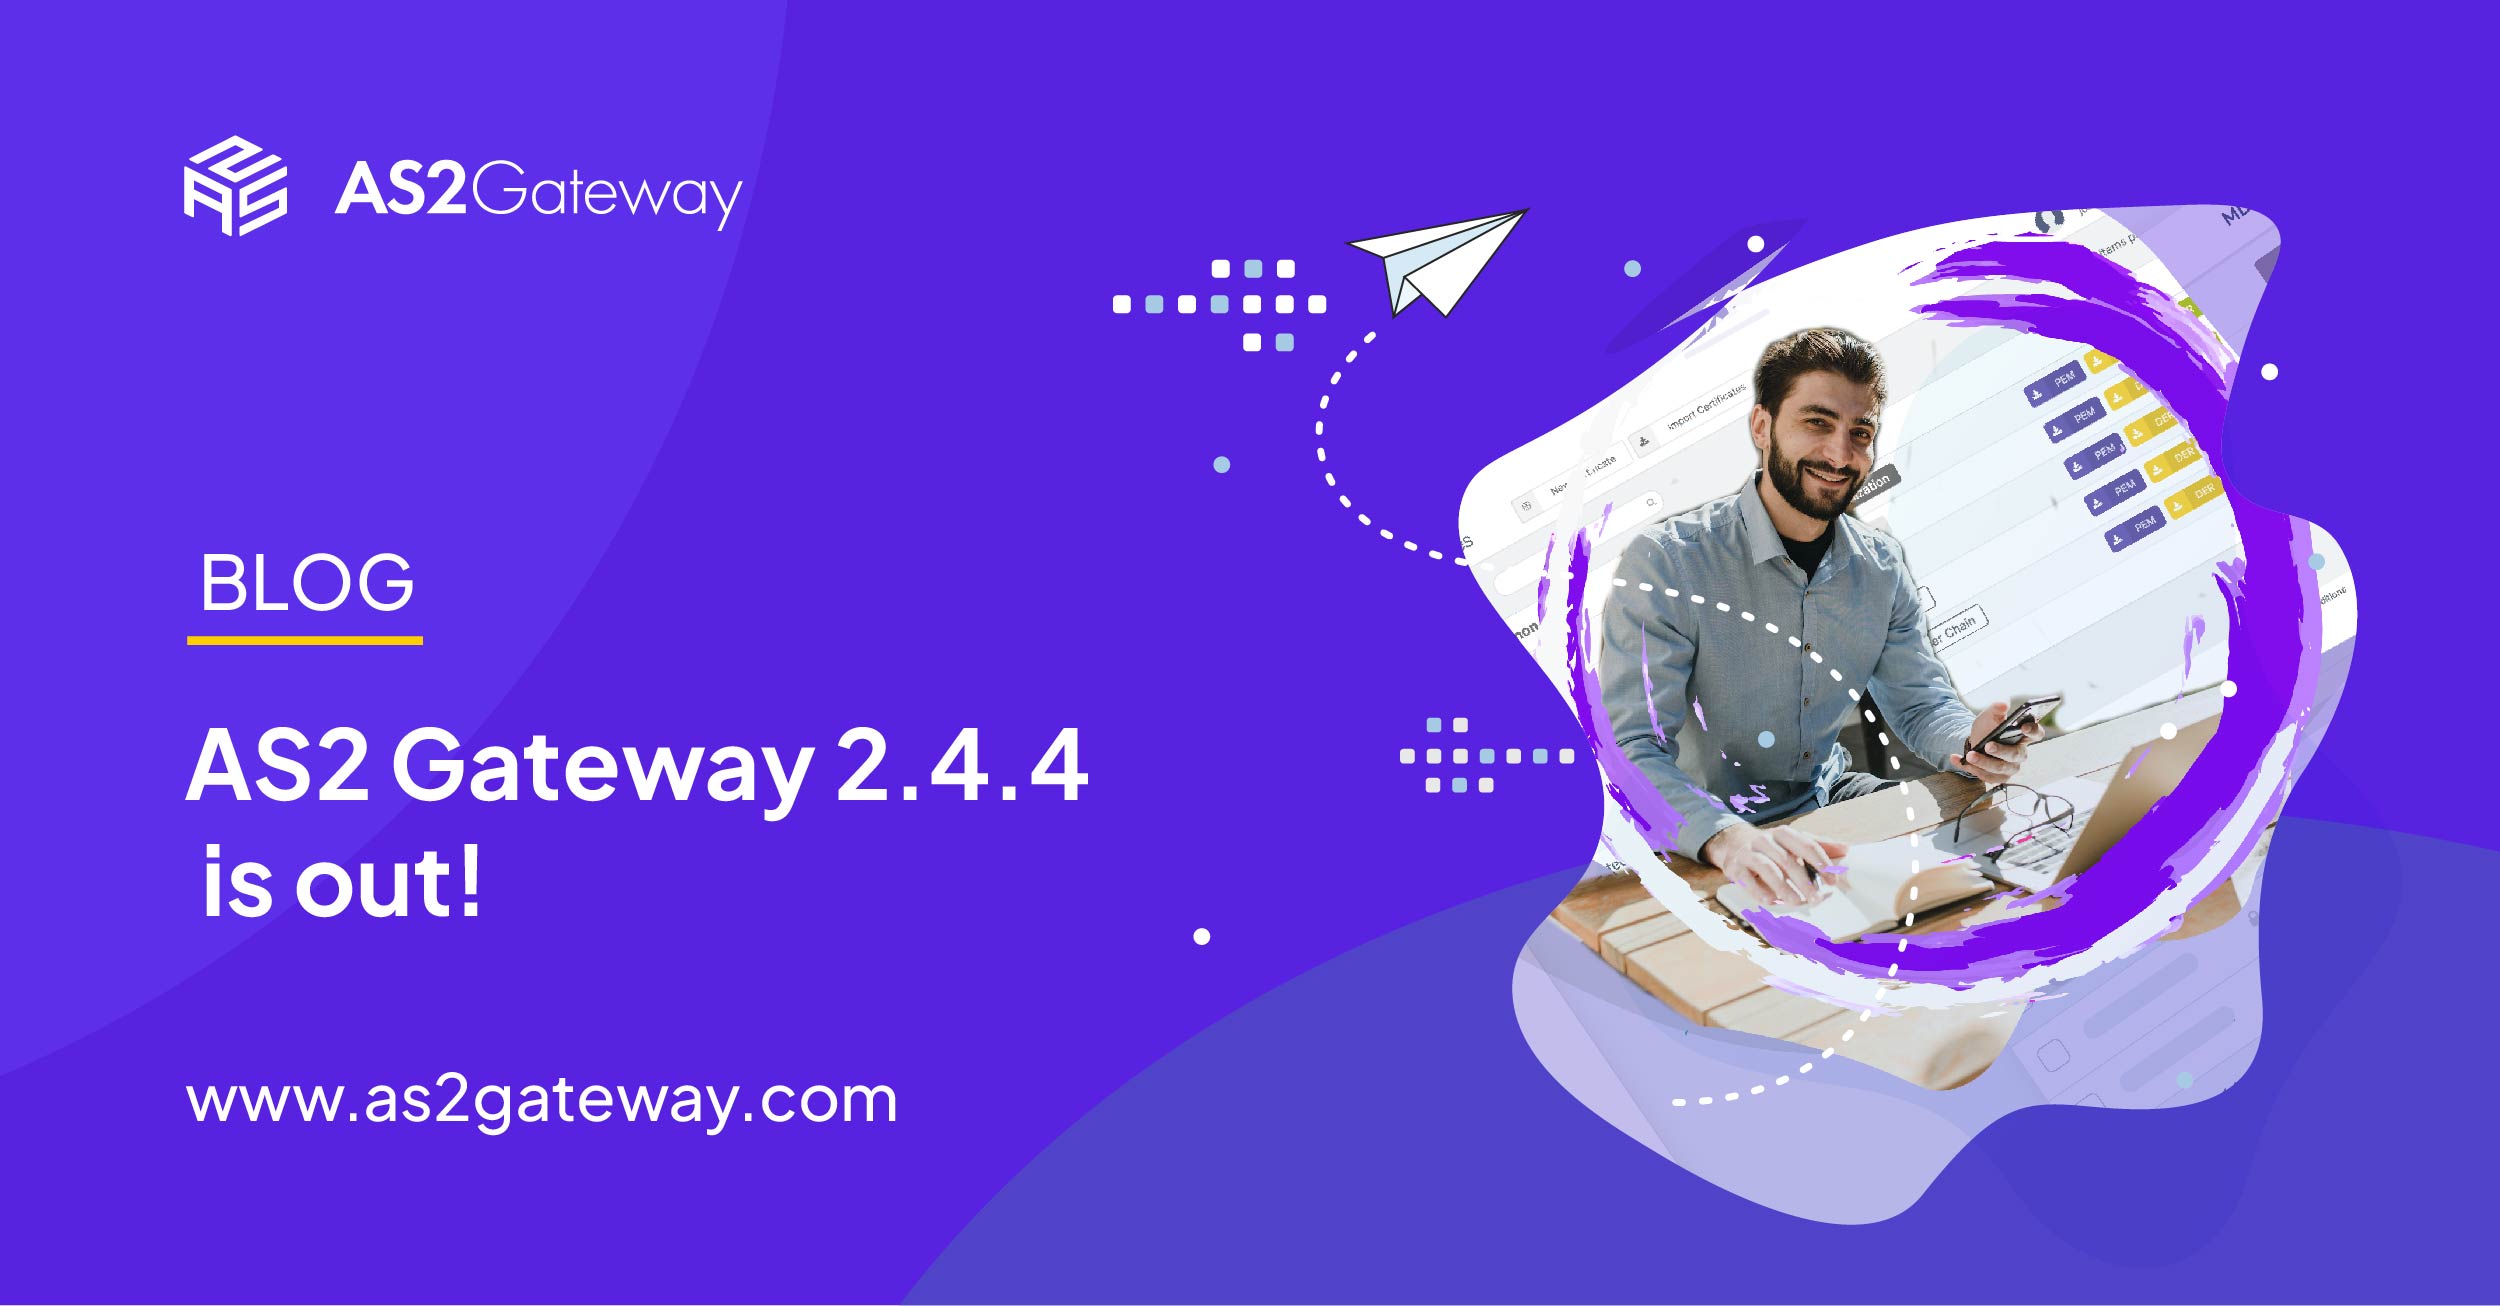 AS2 Gateway 2.4.4 is out!